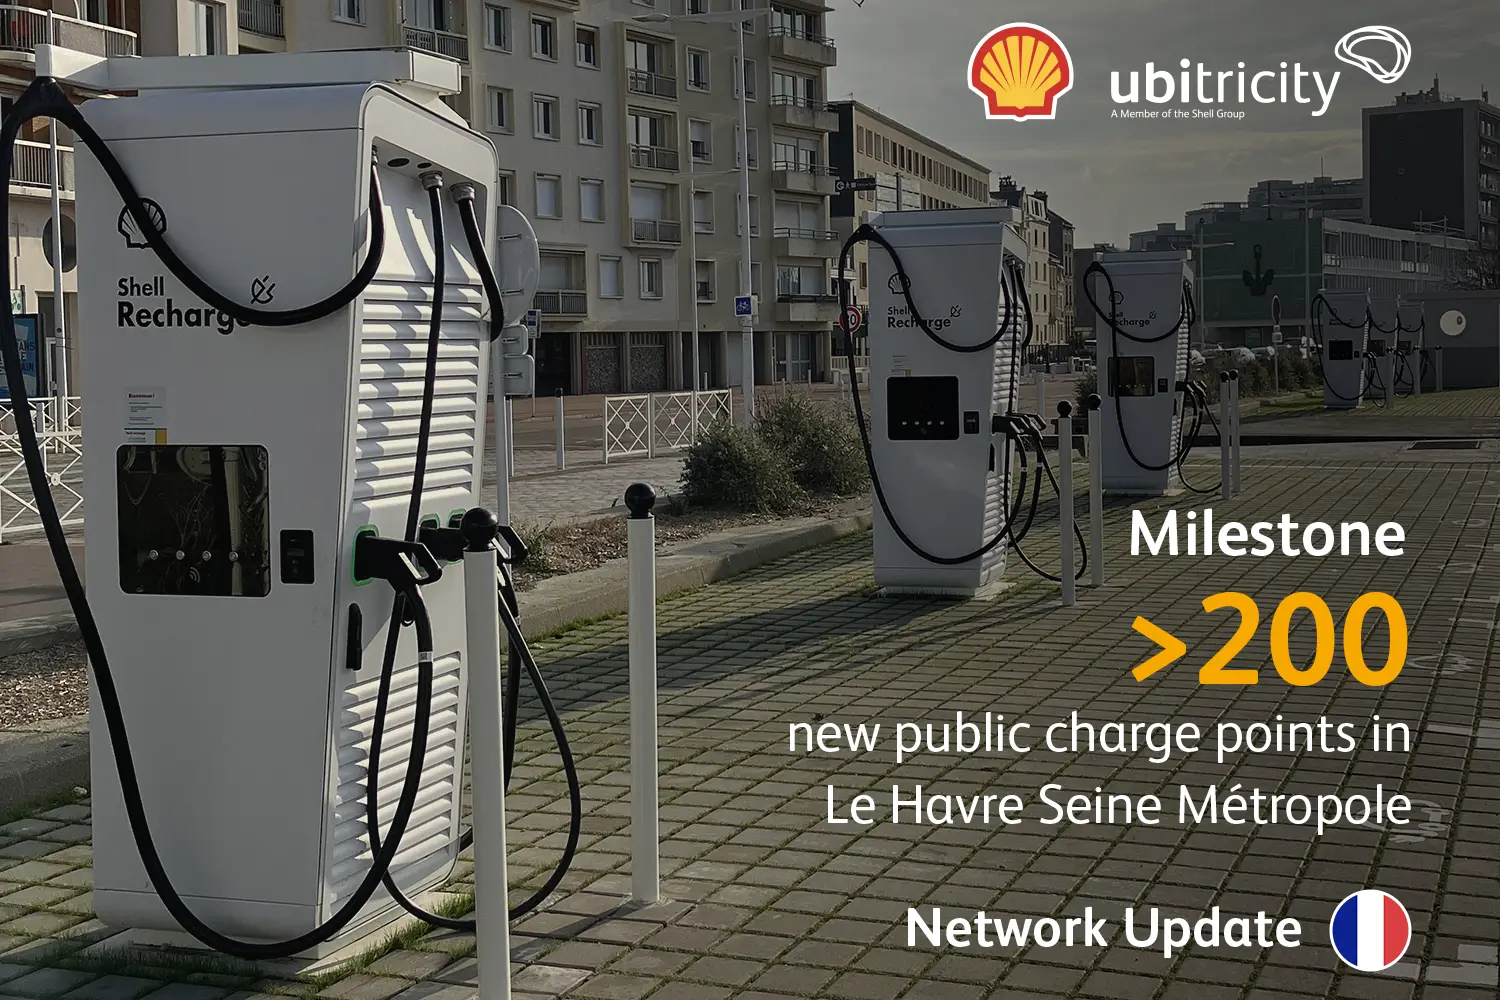 Teaser image for the news of more than 200 new chargers installed in Le Havre, France, showing six DC rapid chargers